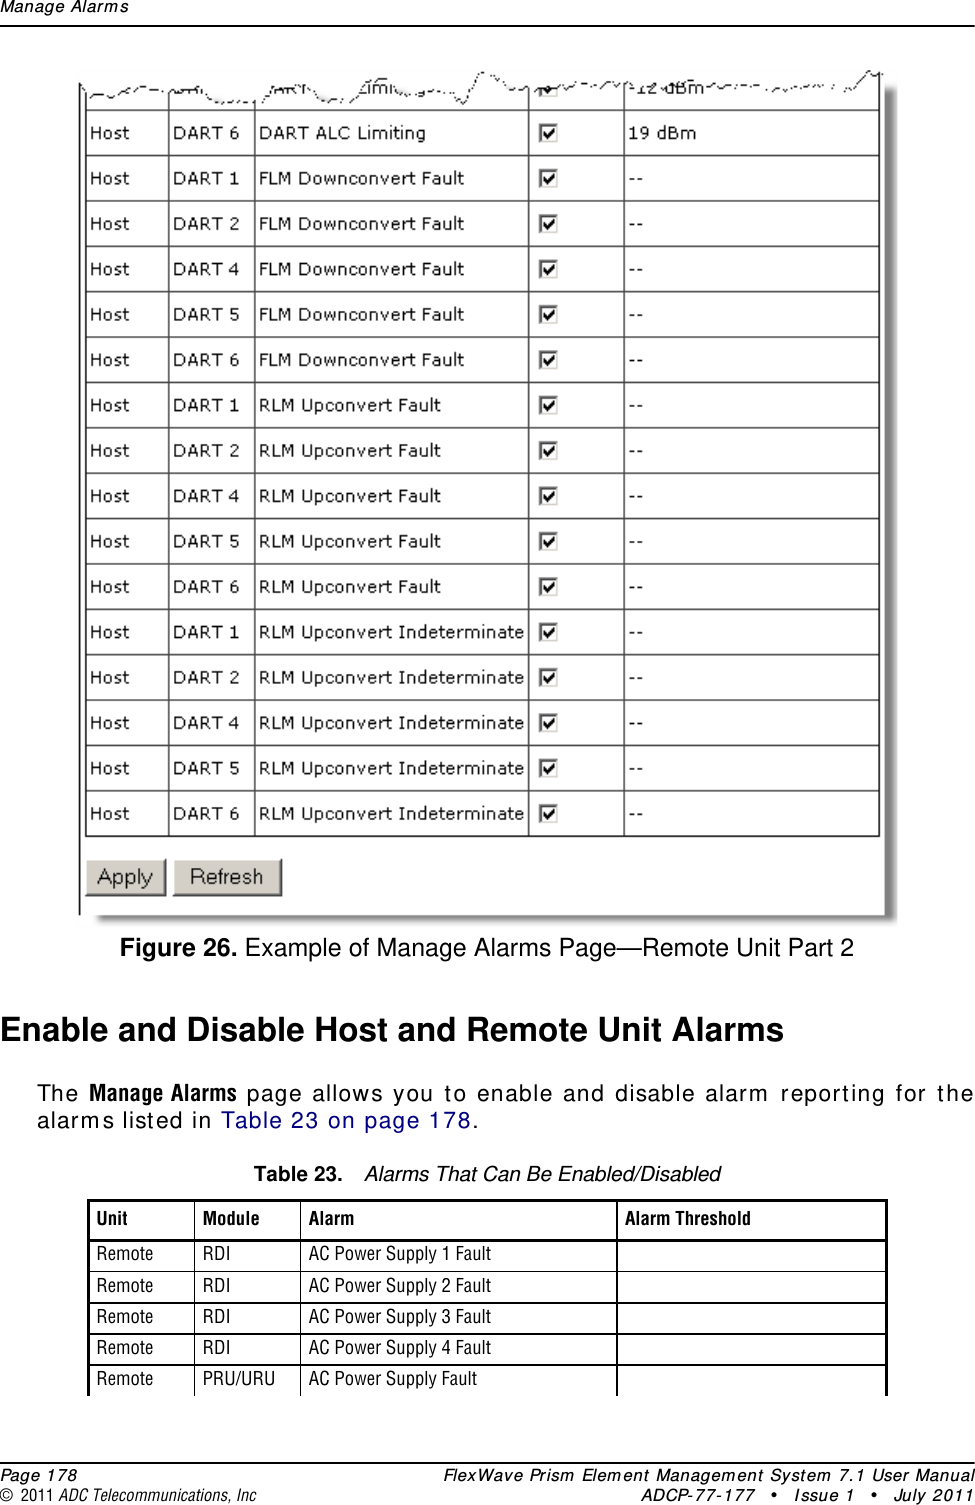 Manage Alarm s  Page 178 FlexWave Prism  Elem ent Managem ent  System  7.1 User Manual© 2011 ADC Telecommunications, Inc ADCP-77- 177 • I ssue 1 • July 2011Figure 26. Example of Manage Alarms Page—Remote Unit Part 2Enable and Disable Host and Remote Unit AlarmsThe  Manage Alarms page allows you t o enable and disable alarm  reporting for t he alarm s list ed in Table 23 on page 178.Table 23. Alarms That Can Be Enabled/Disabled  Unit Module Alarm Alarm ThresholdRemote RDI AC Power Supply 1 FaultRemote RDI AC Power Supply 2 FaultRemote RDI AC Power Supply 3 FaultRemote RDI AC Power Supply 4 FaultRemote PRU/URU AC Power Supply Fault